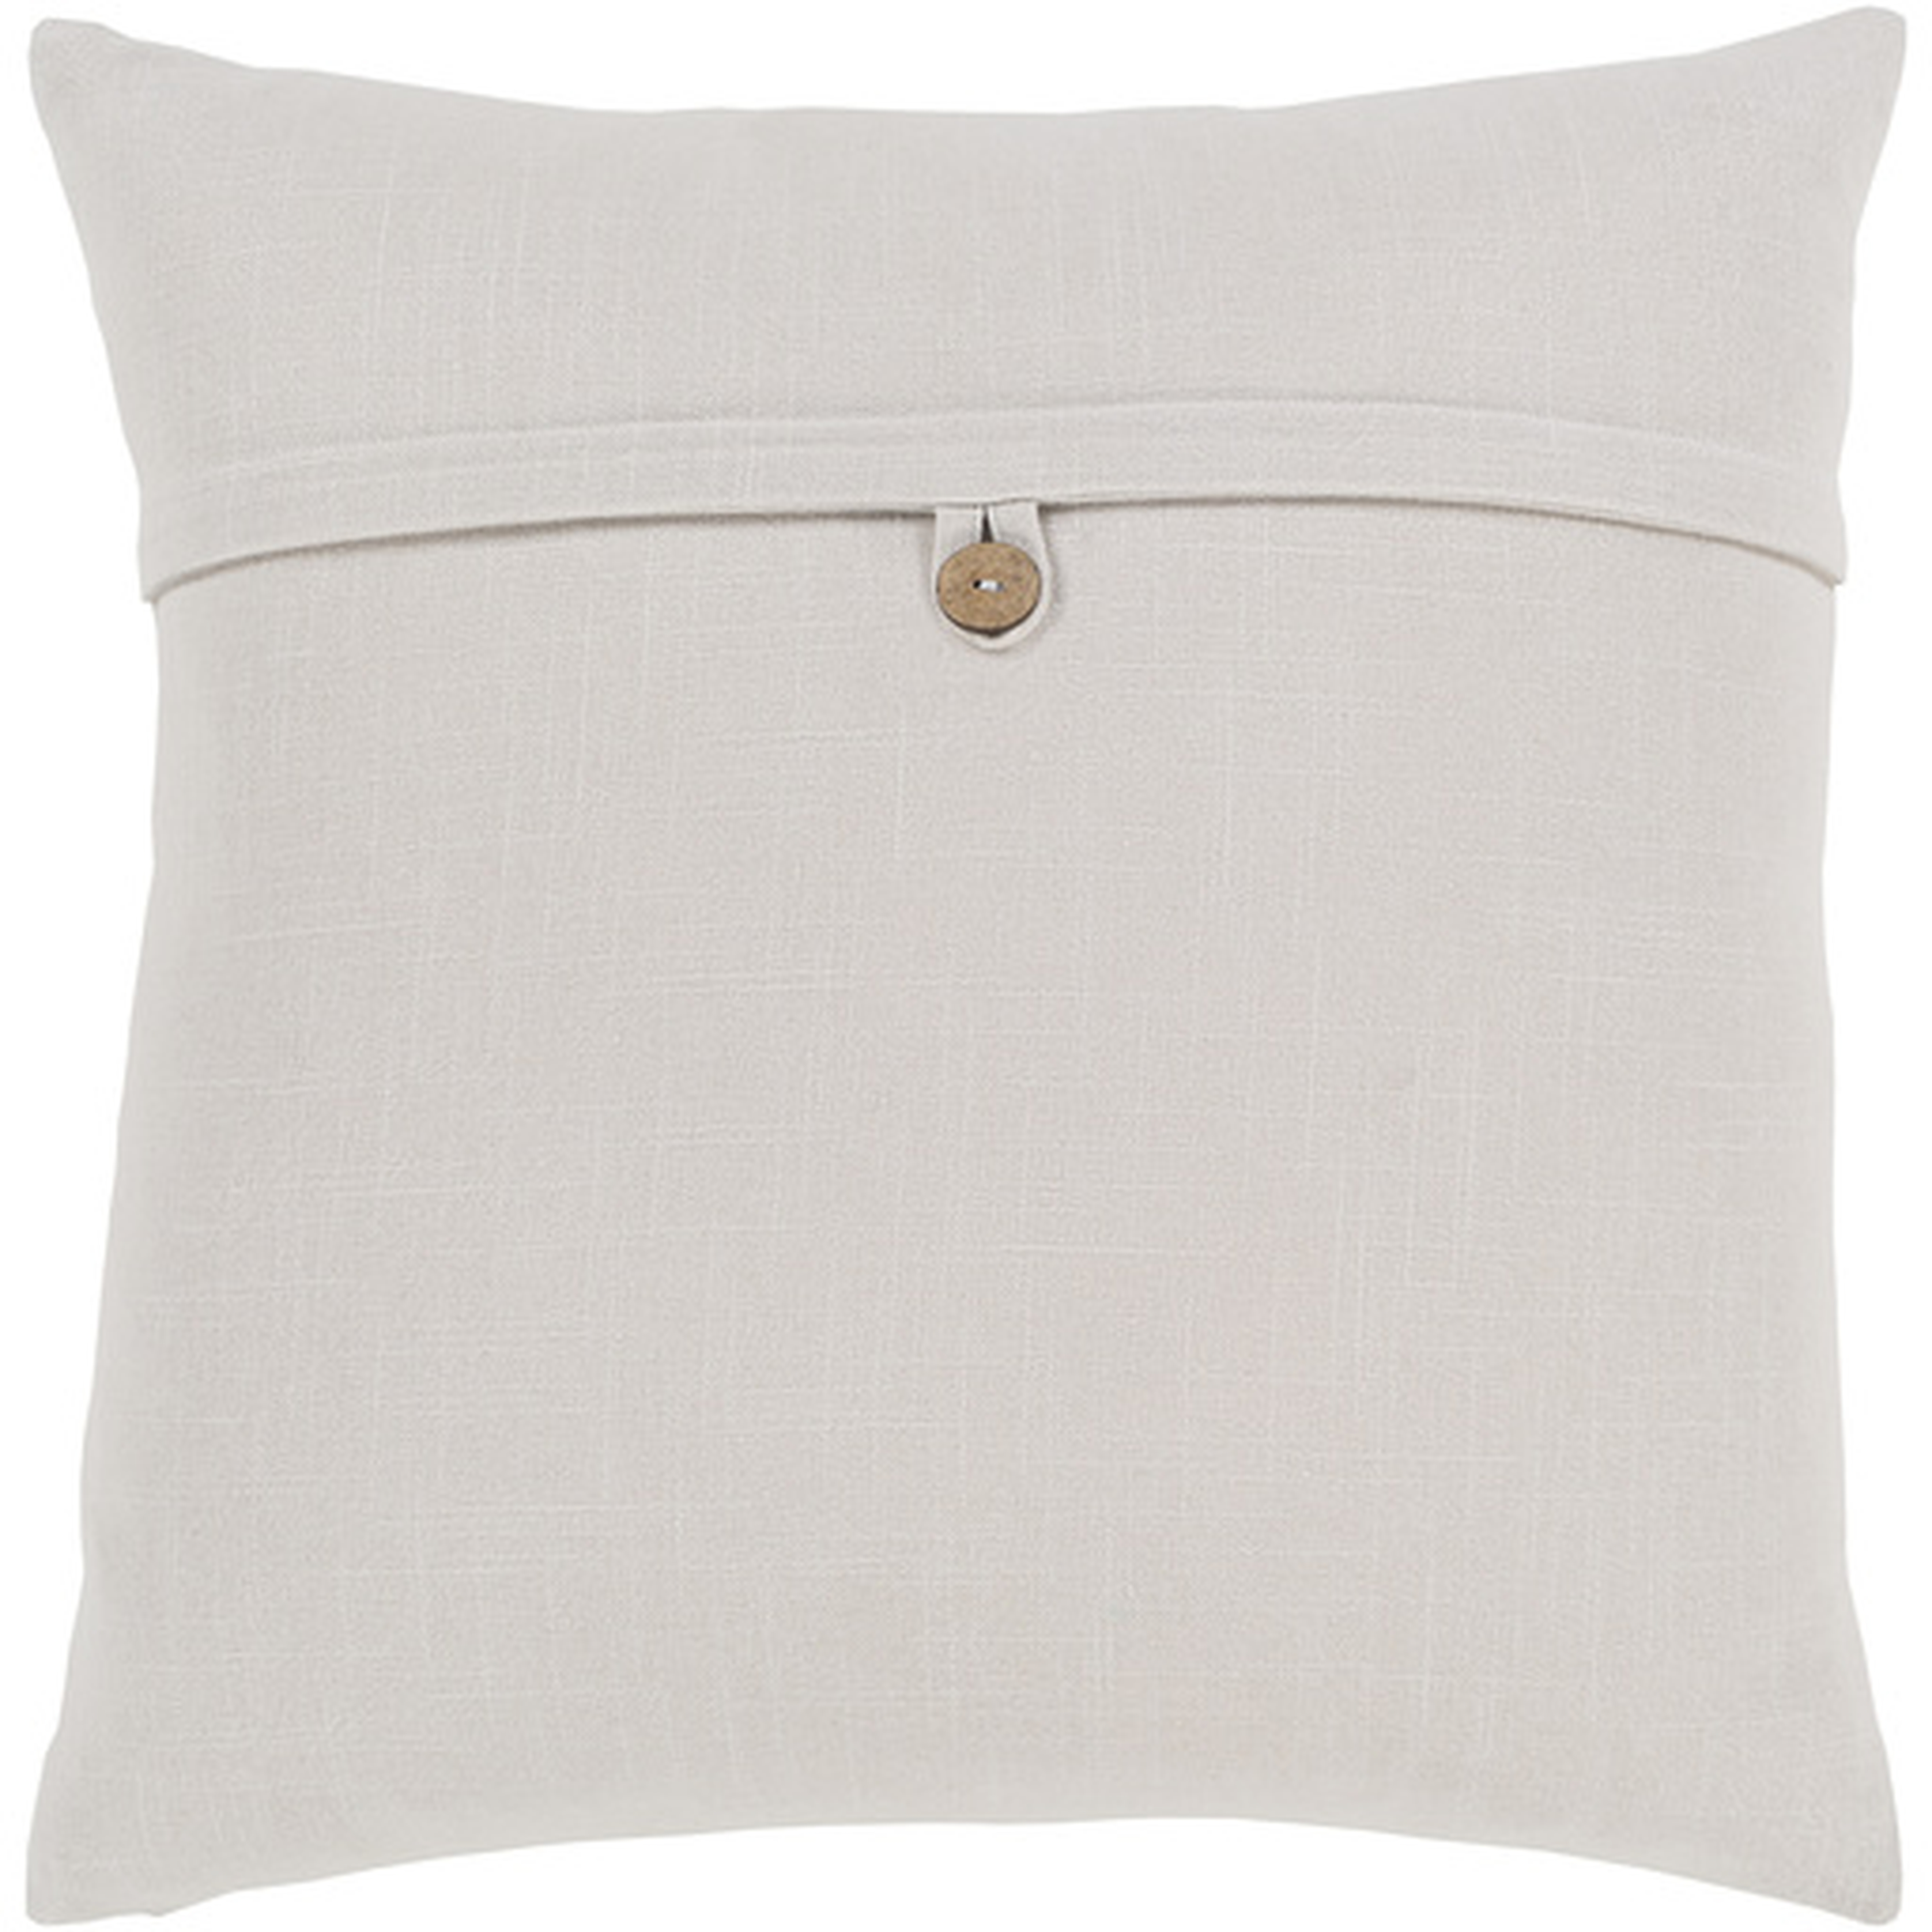 Perine Pillow Cover, 20" x 20", Ivory - Cove Goods